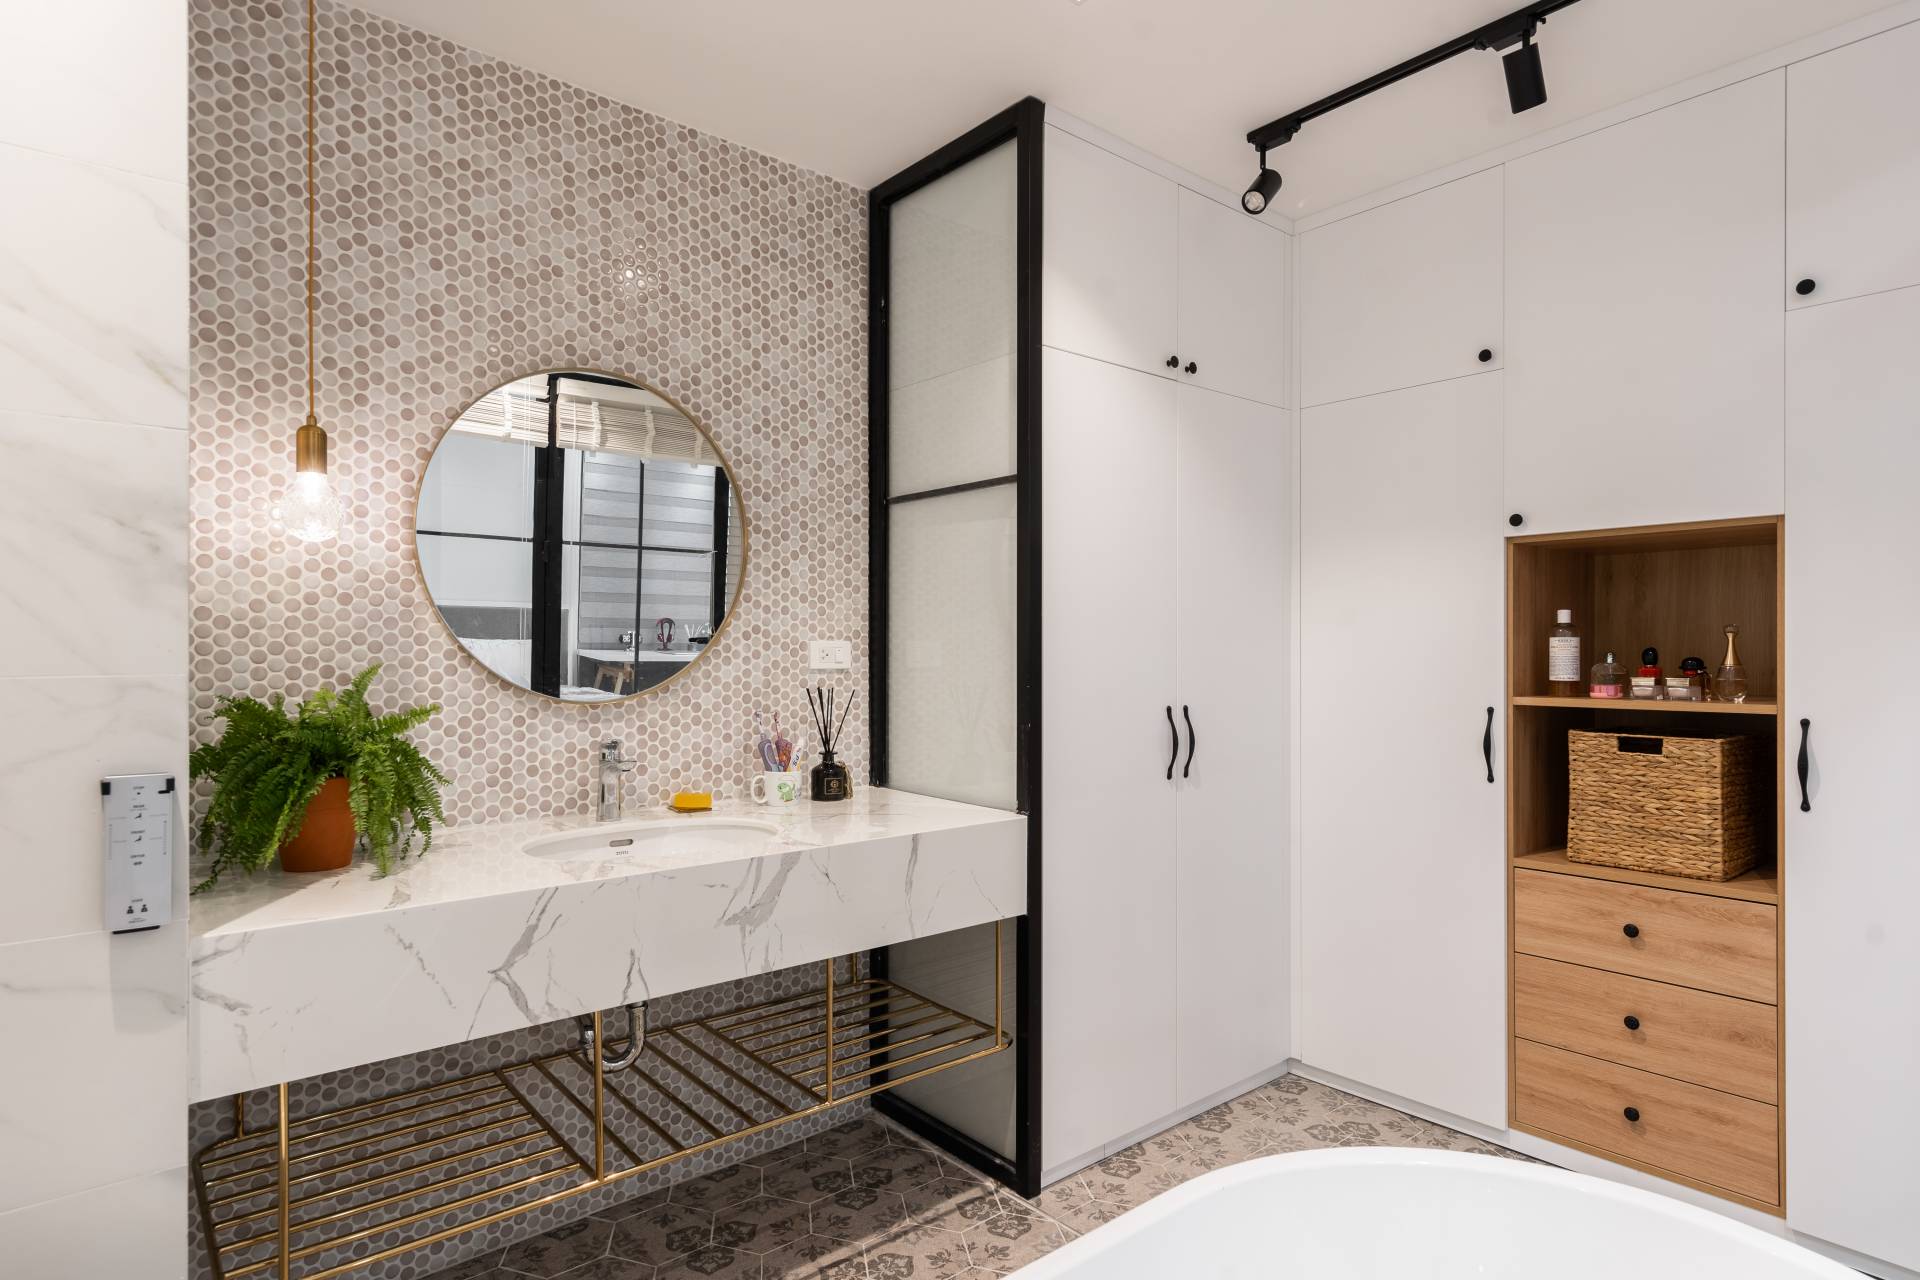 Elegant, sophisticated and modern bathroom space in the spirit of Scandinavian style.